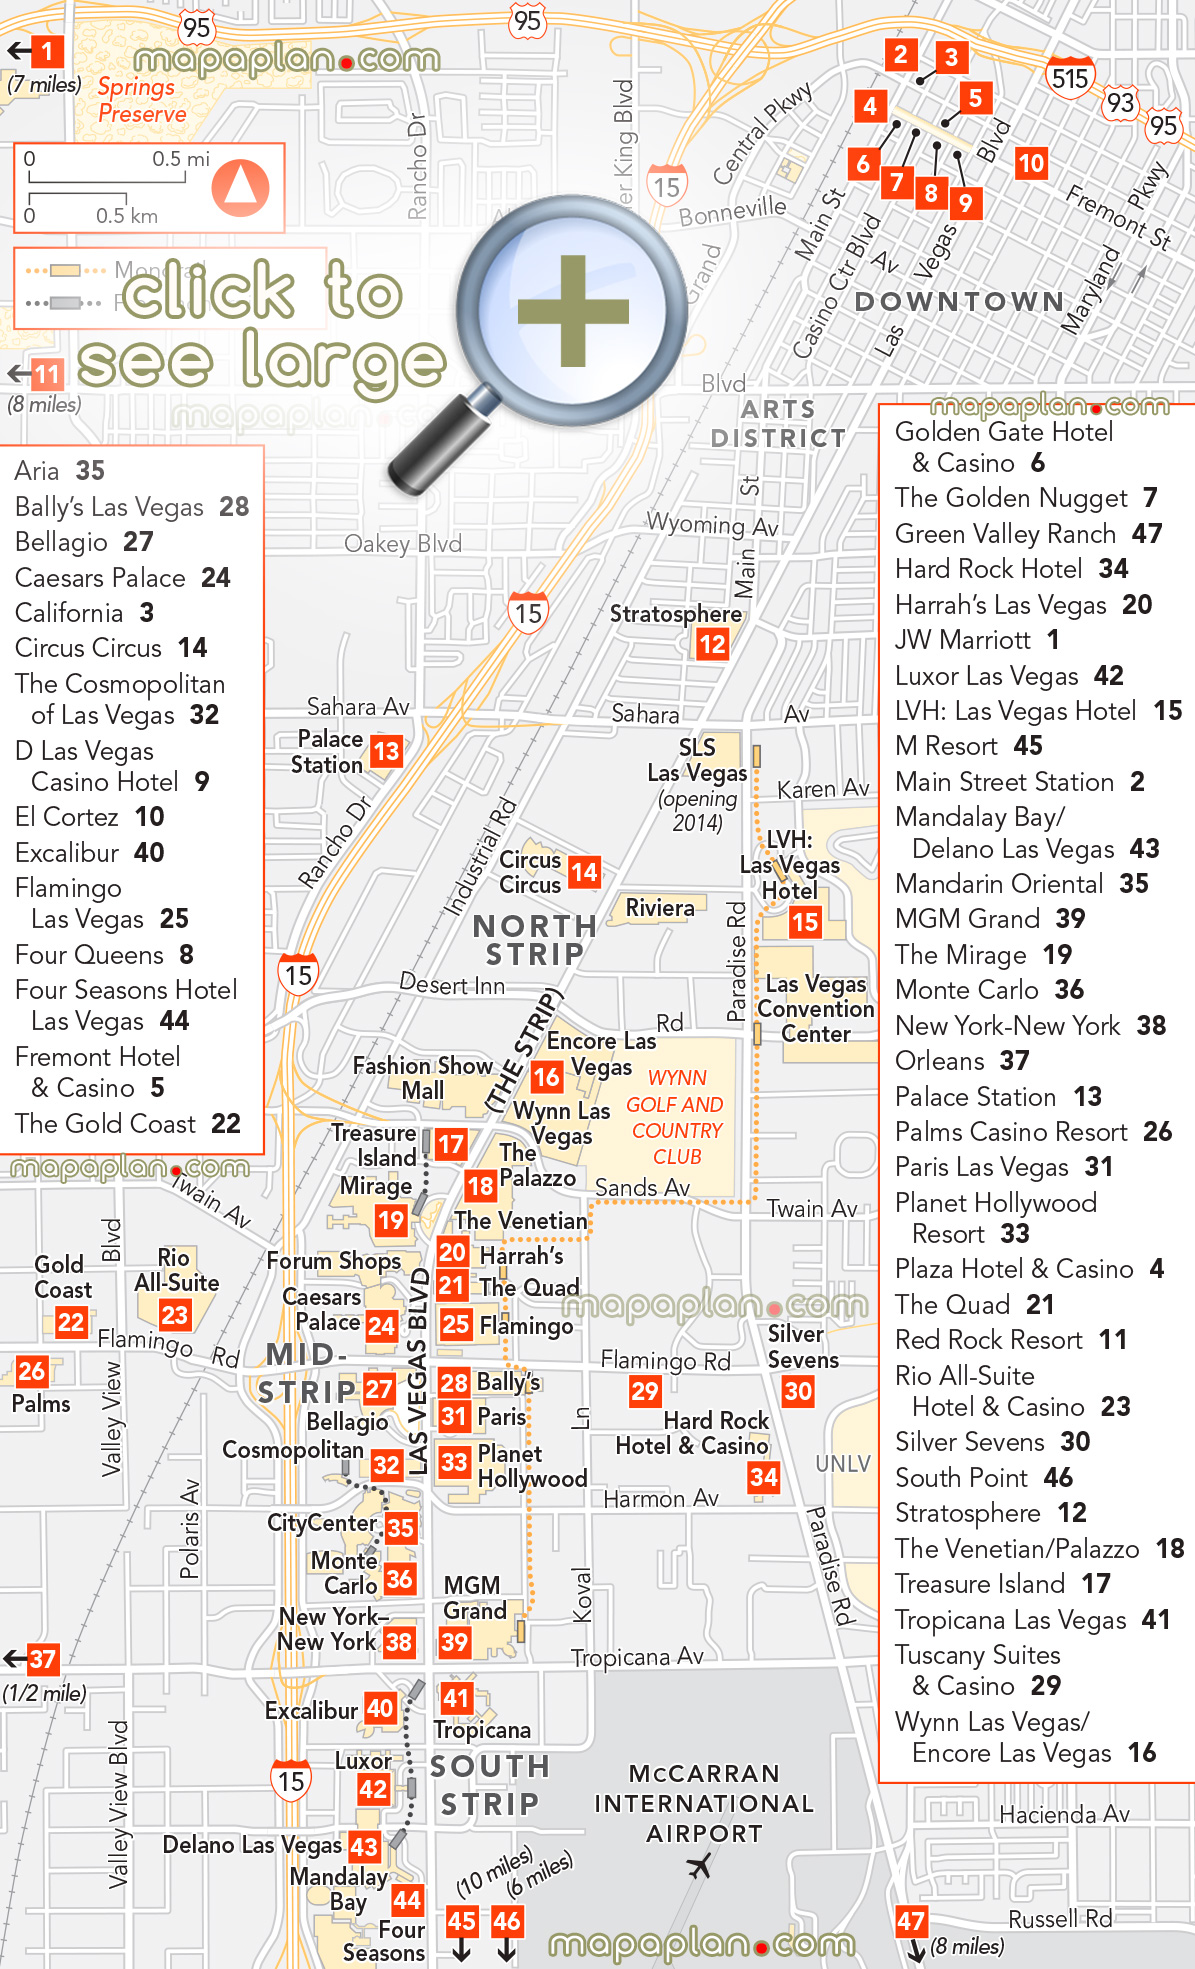 las vegas map - a-z list of all hotels on the strip including aria